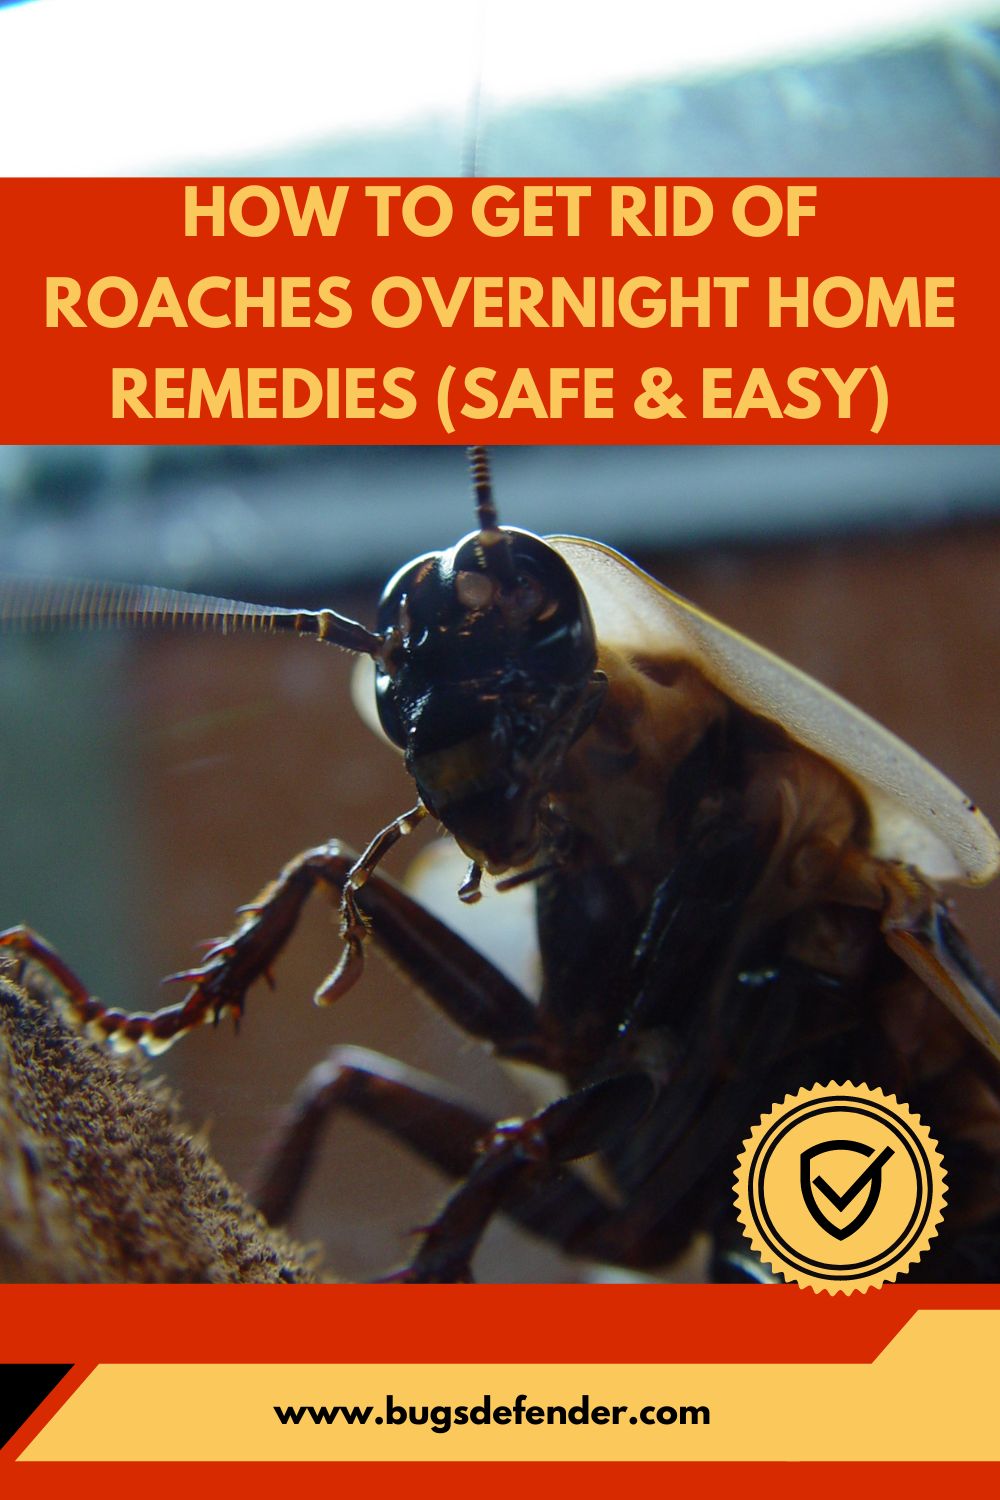 How To Get Rid Of Roaches Overnight Home Remedies (Safe & Easy) pin 2